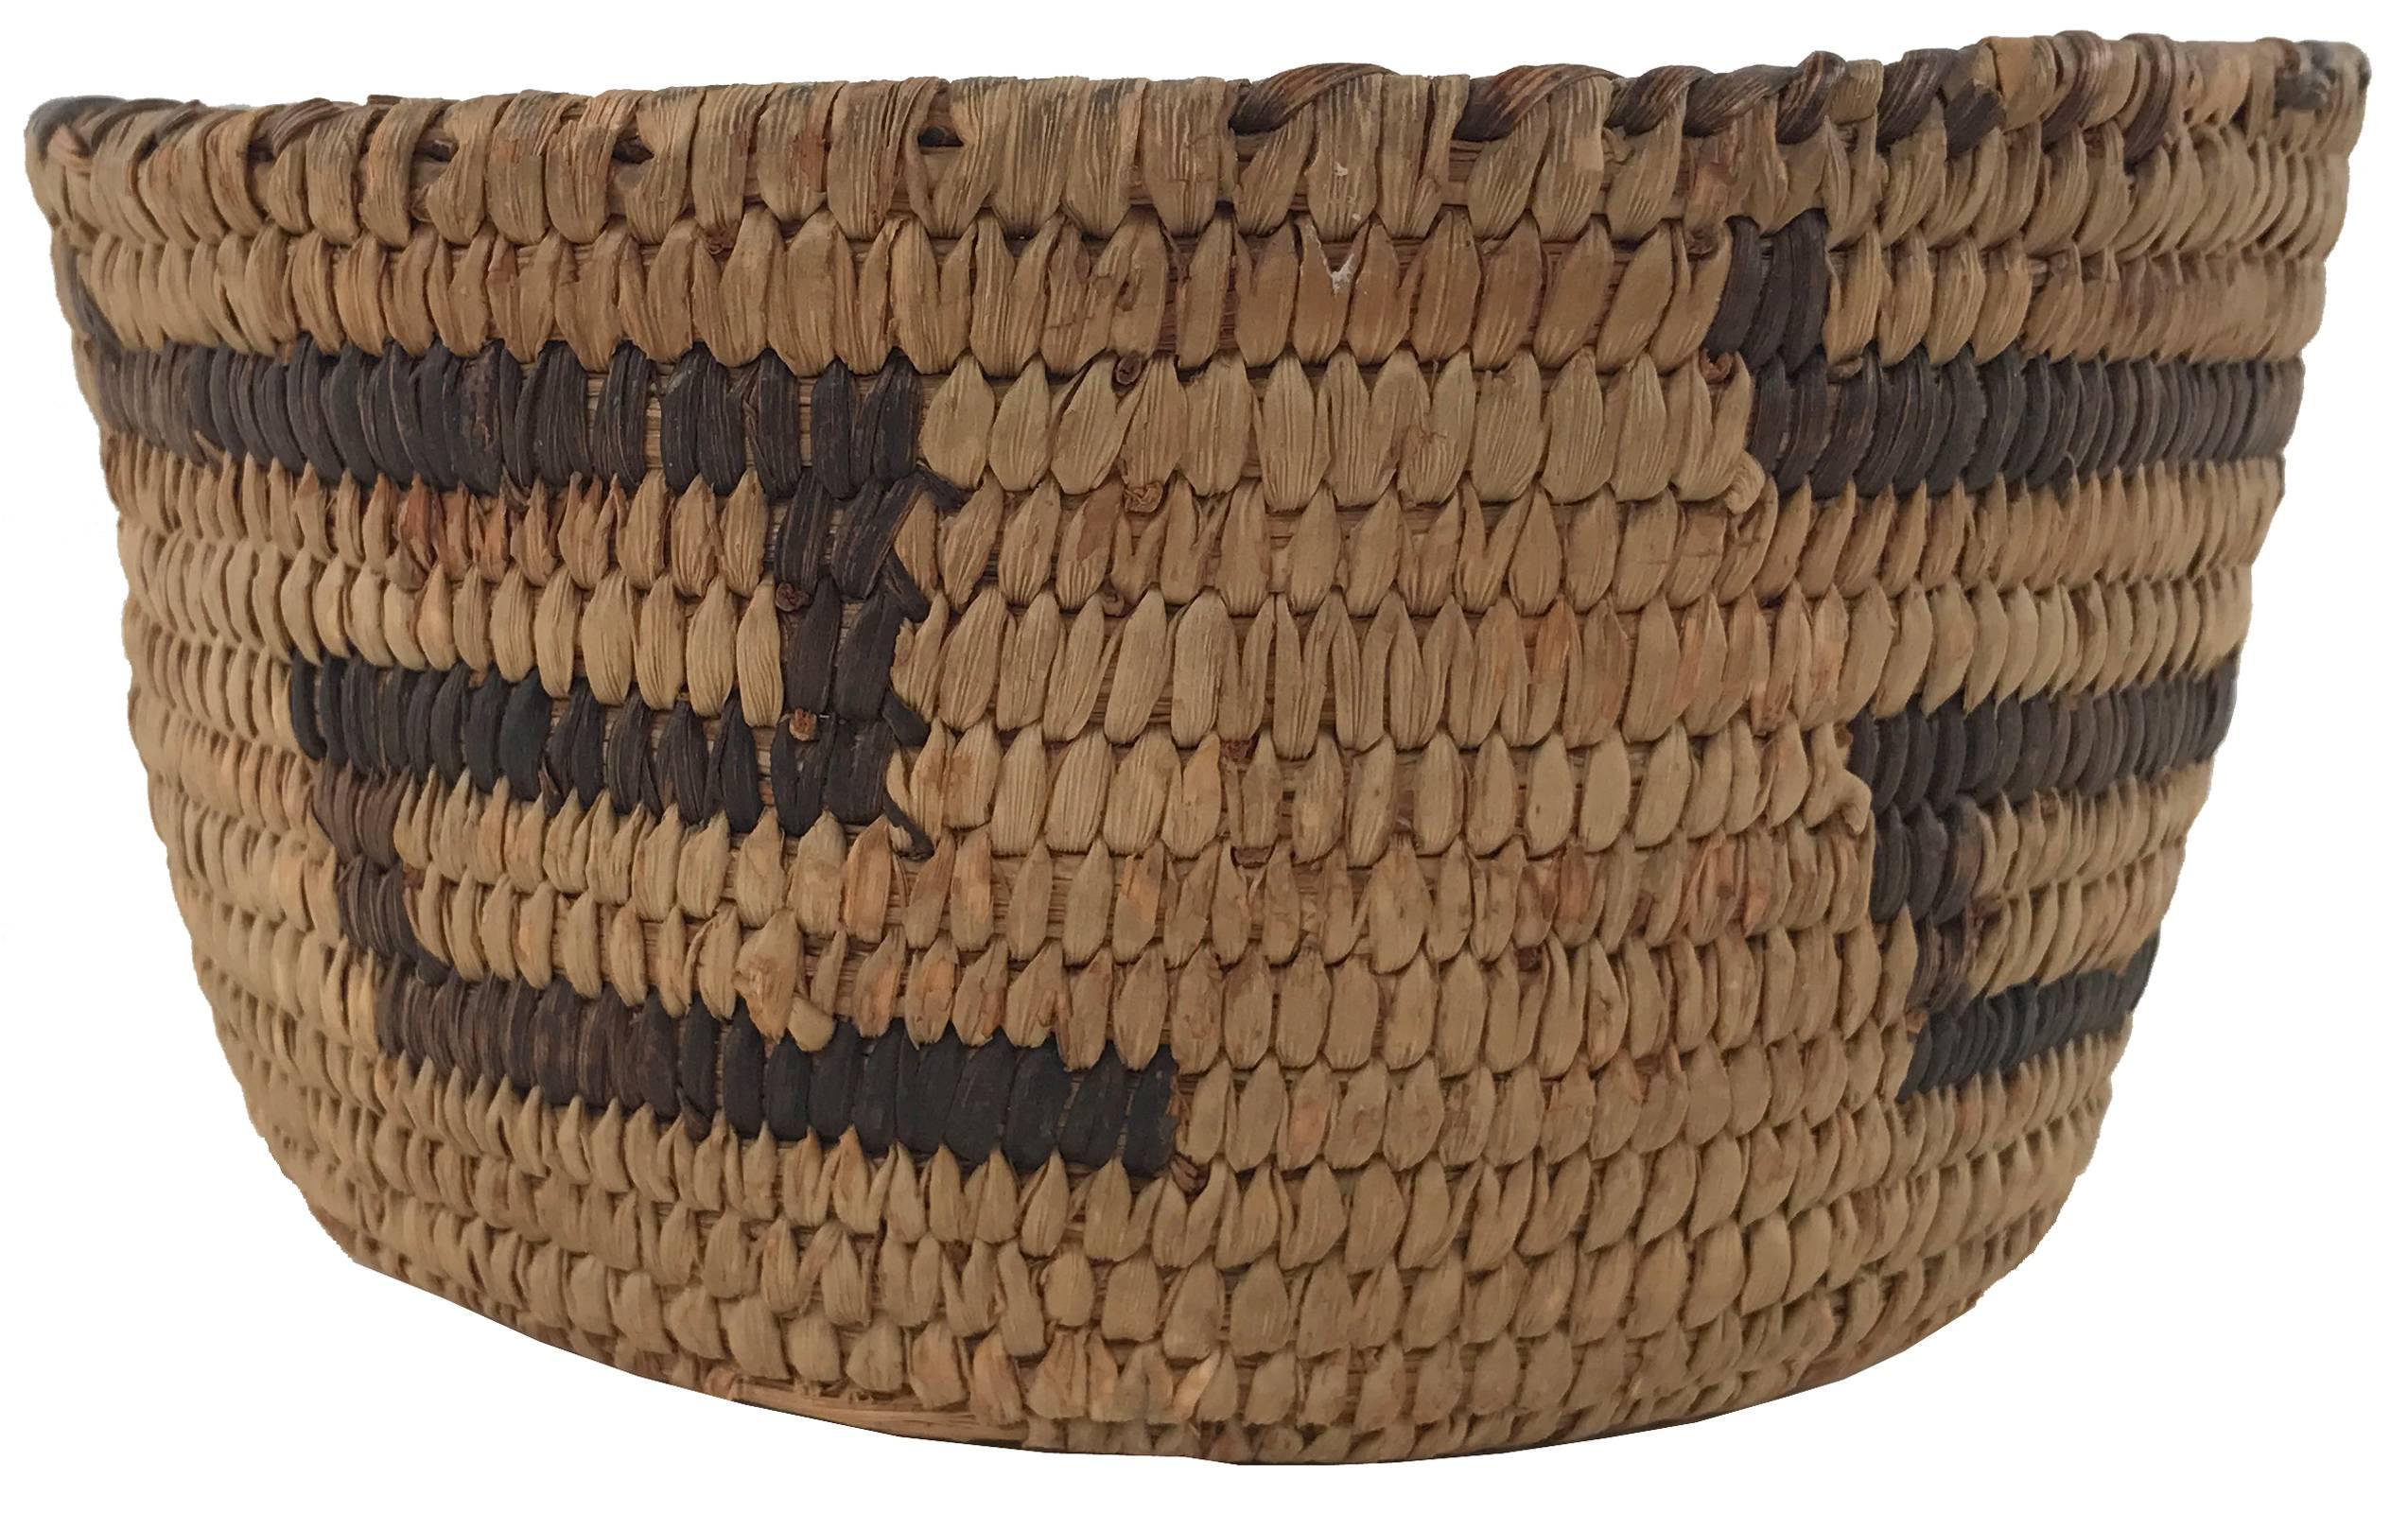 Woven Small Twined Native American Bowl